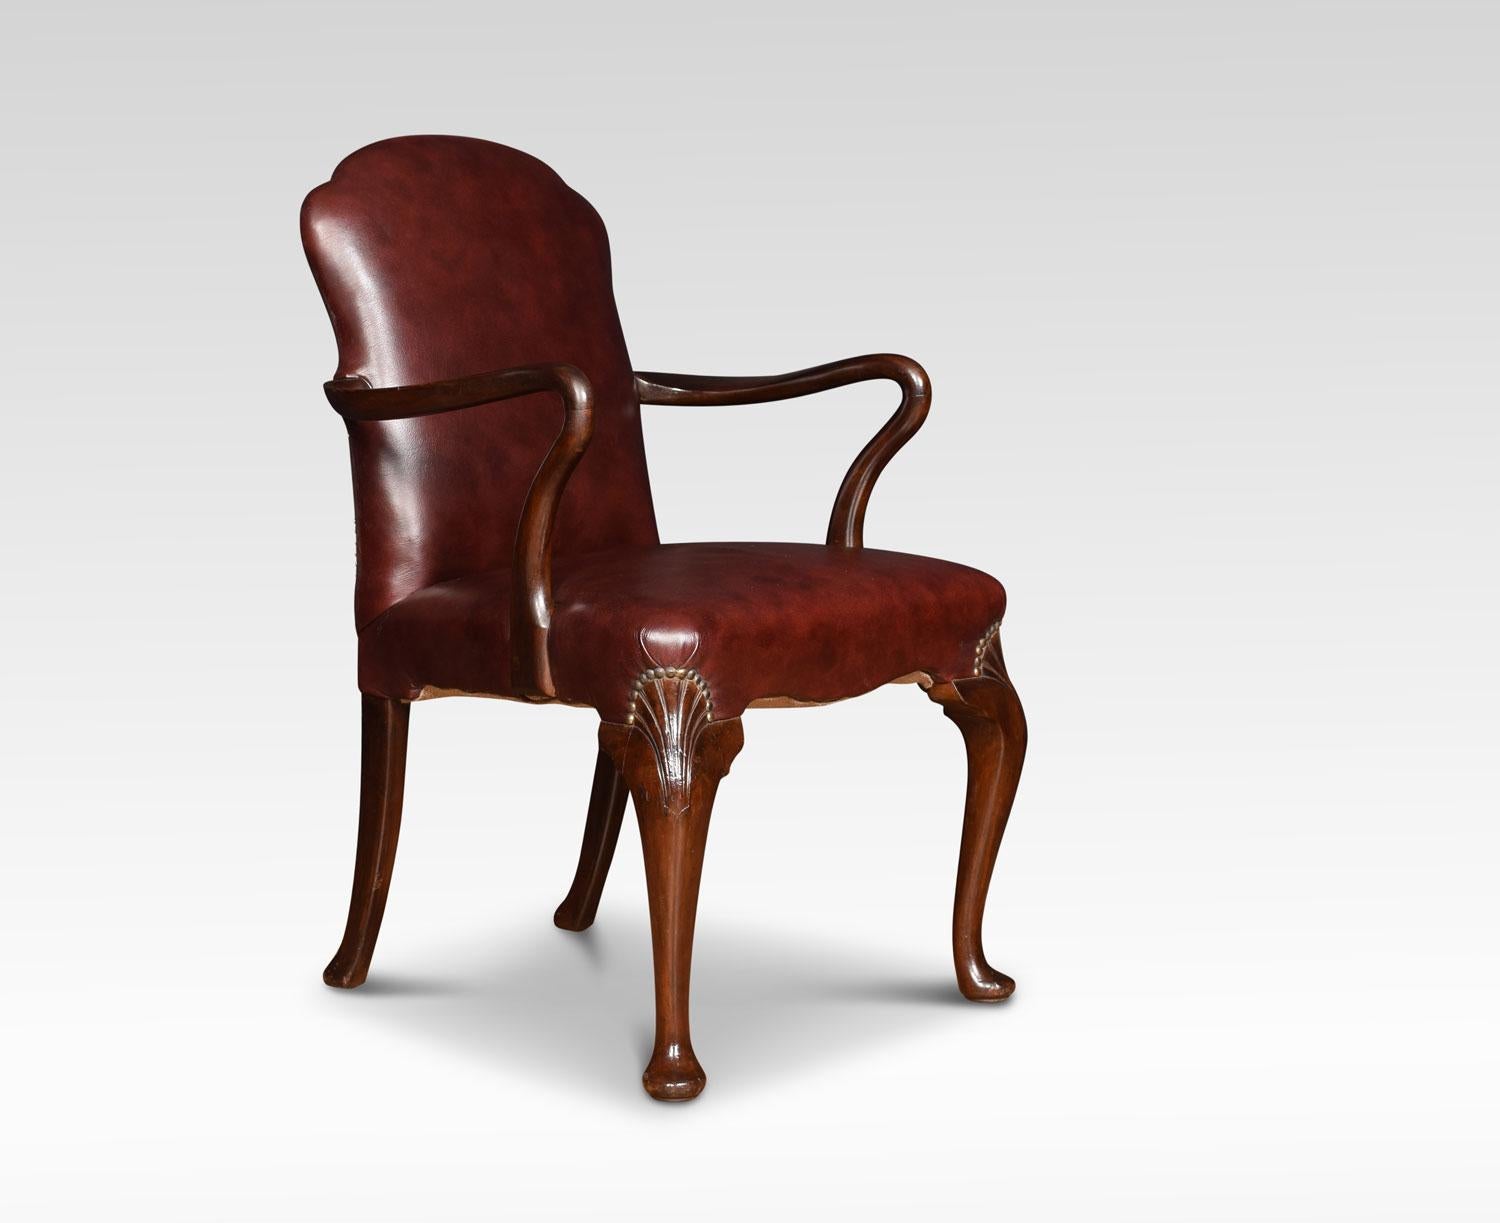 A pair of mahogany armchairs chairs, the Burgundy leather upholstered back and seat flanked by shepherds crook arms. All raised up on shell carved cabriole legs terminating in pad feet.
Dimensions:
Height 37 inches height to seat 19 inches
Width